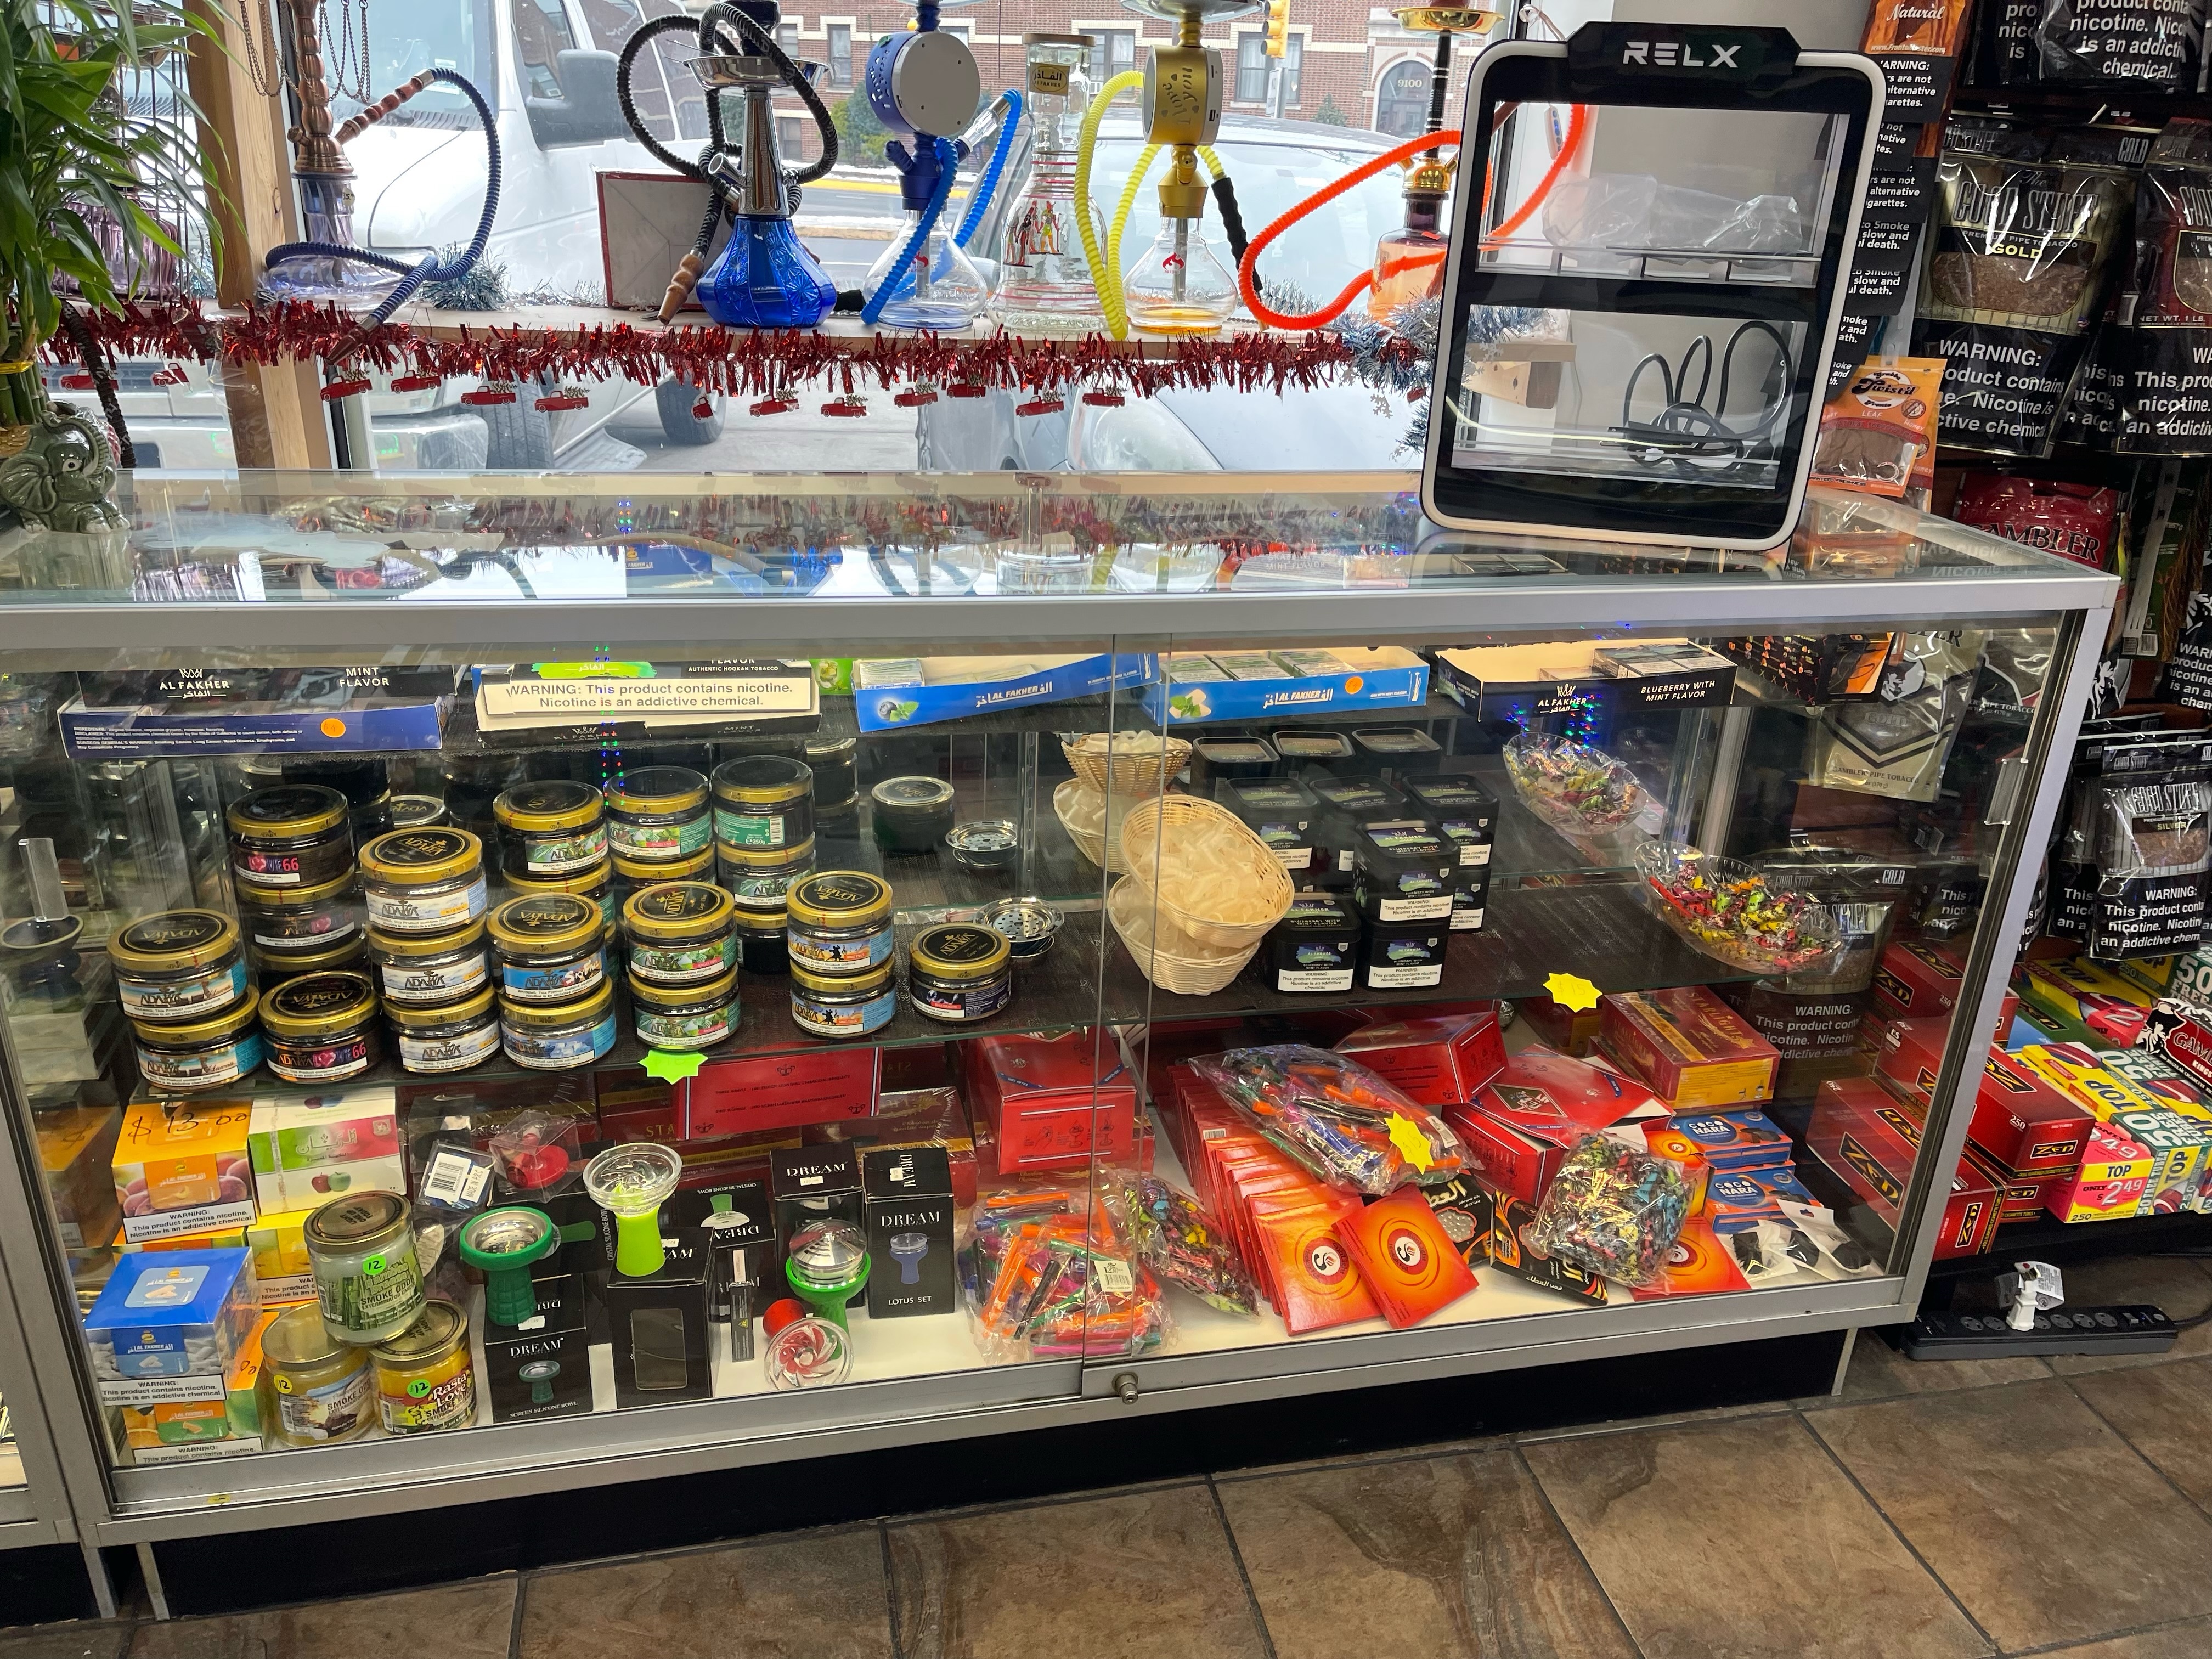 Busy Convenience Store for sale in NJ